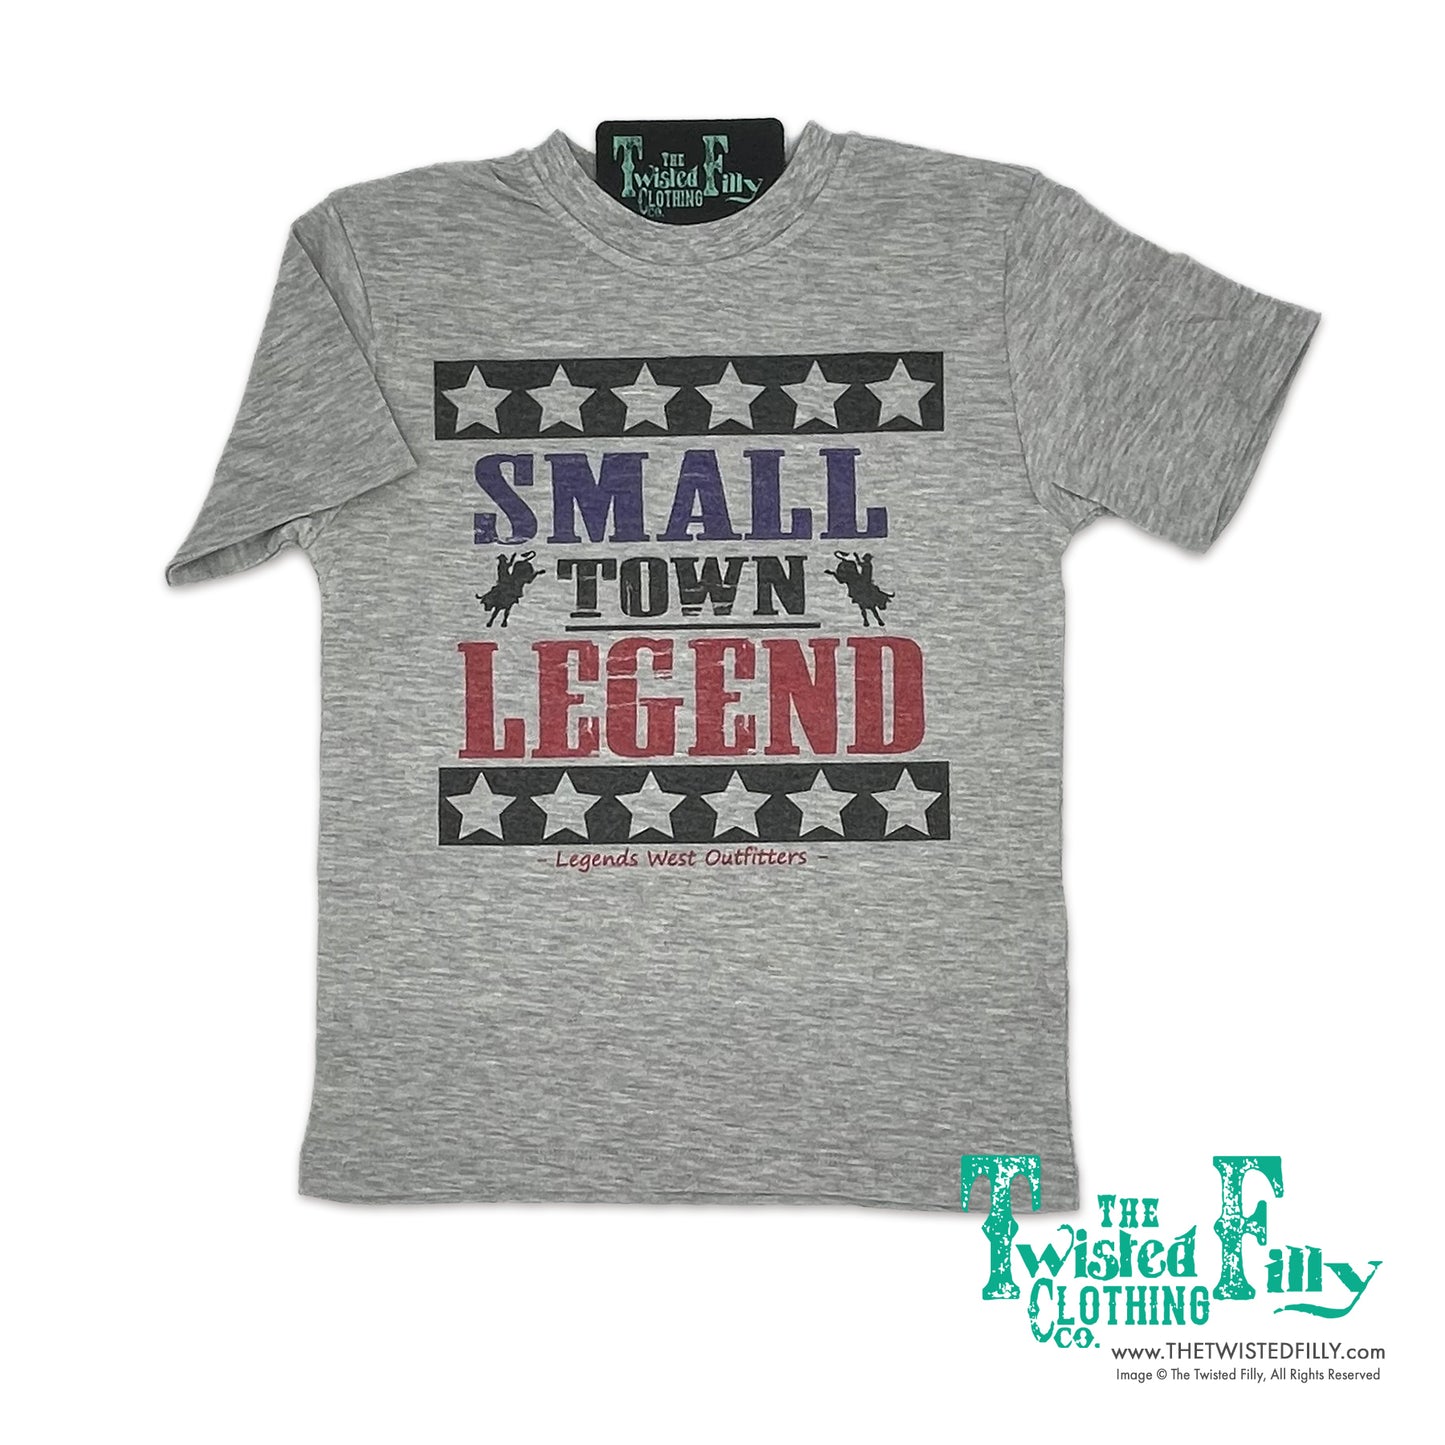 Small Town Legend - S/S Toddler Tee - Gray